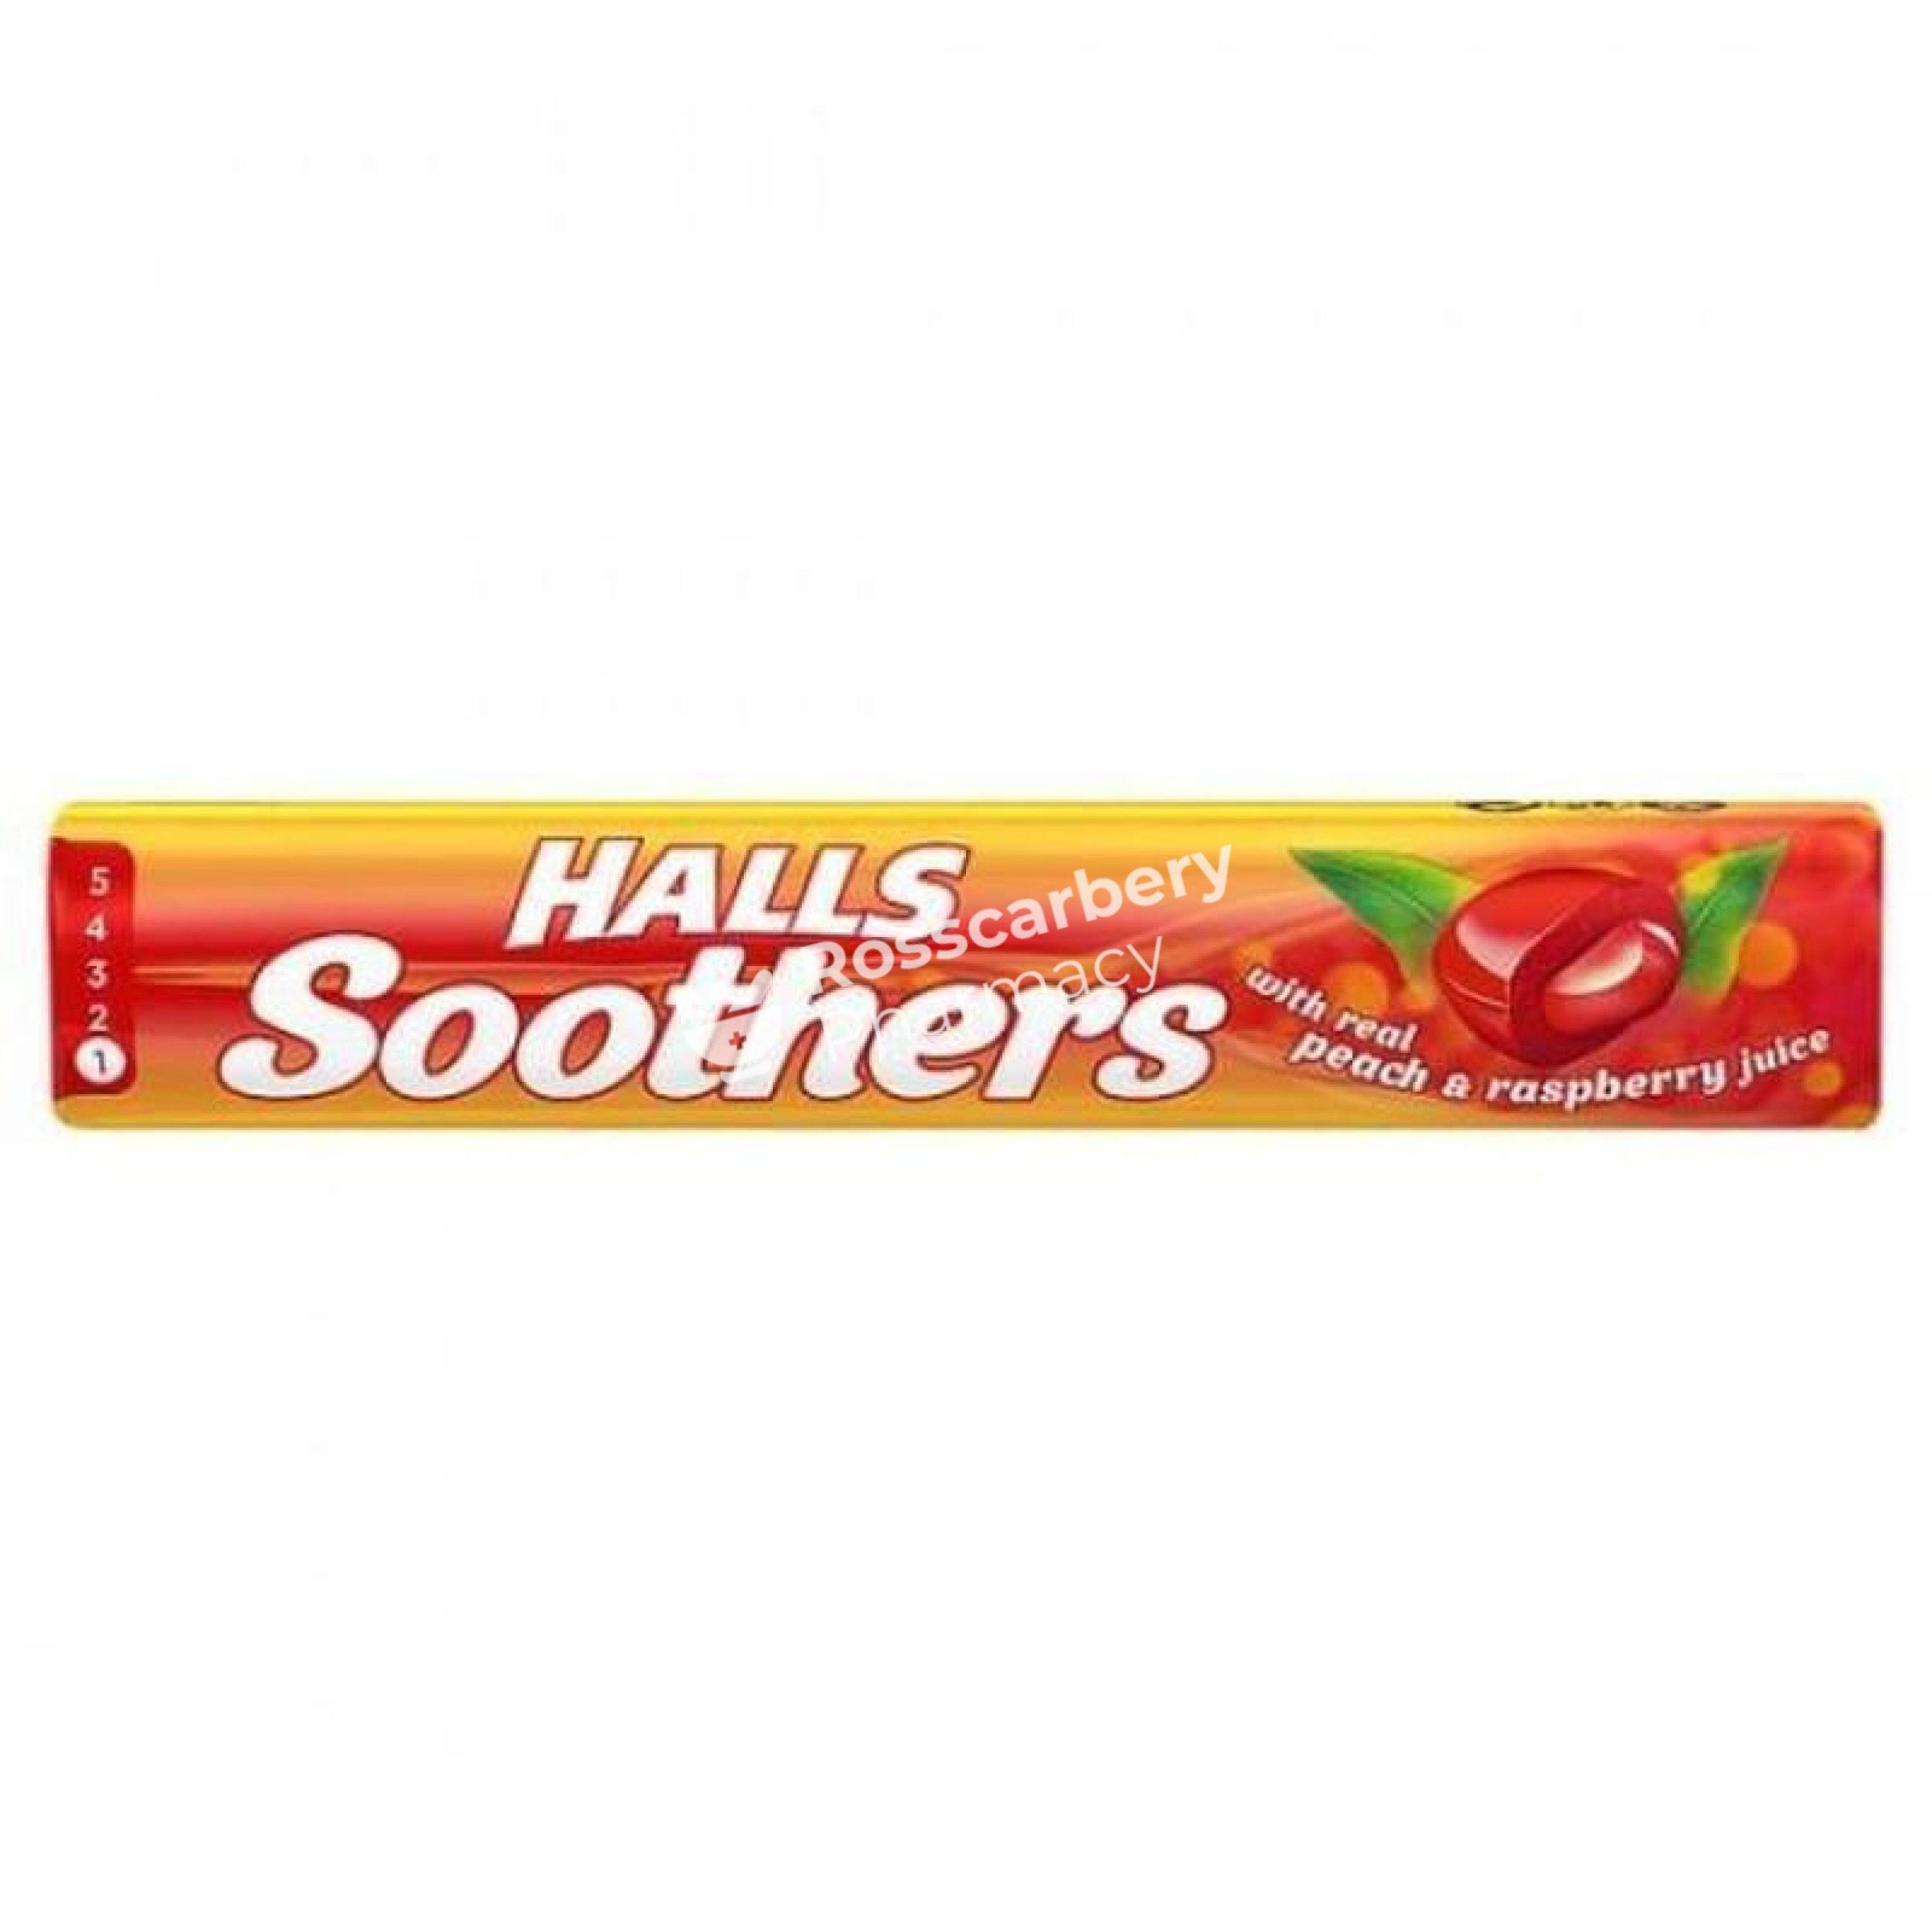 Halls Soothers Throat Sweets - Peach & Raspberry